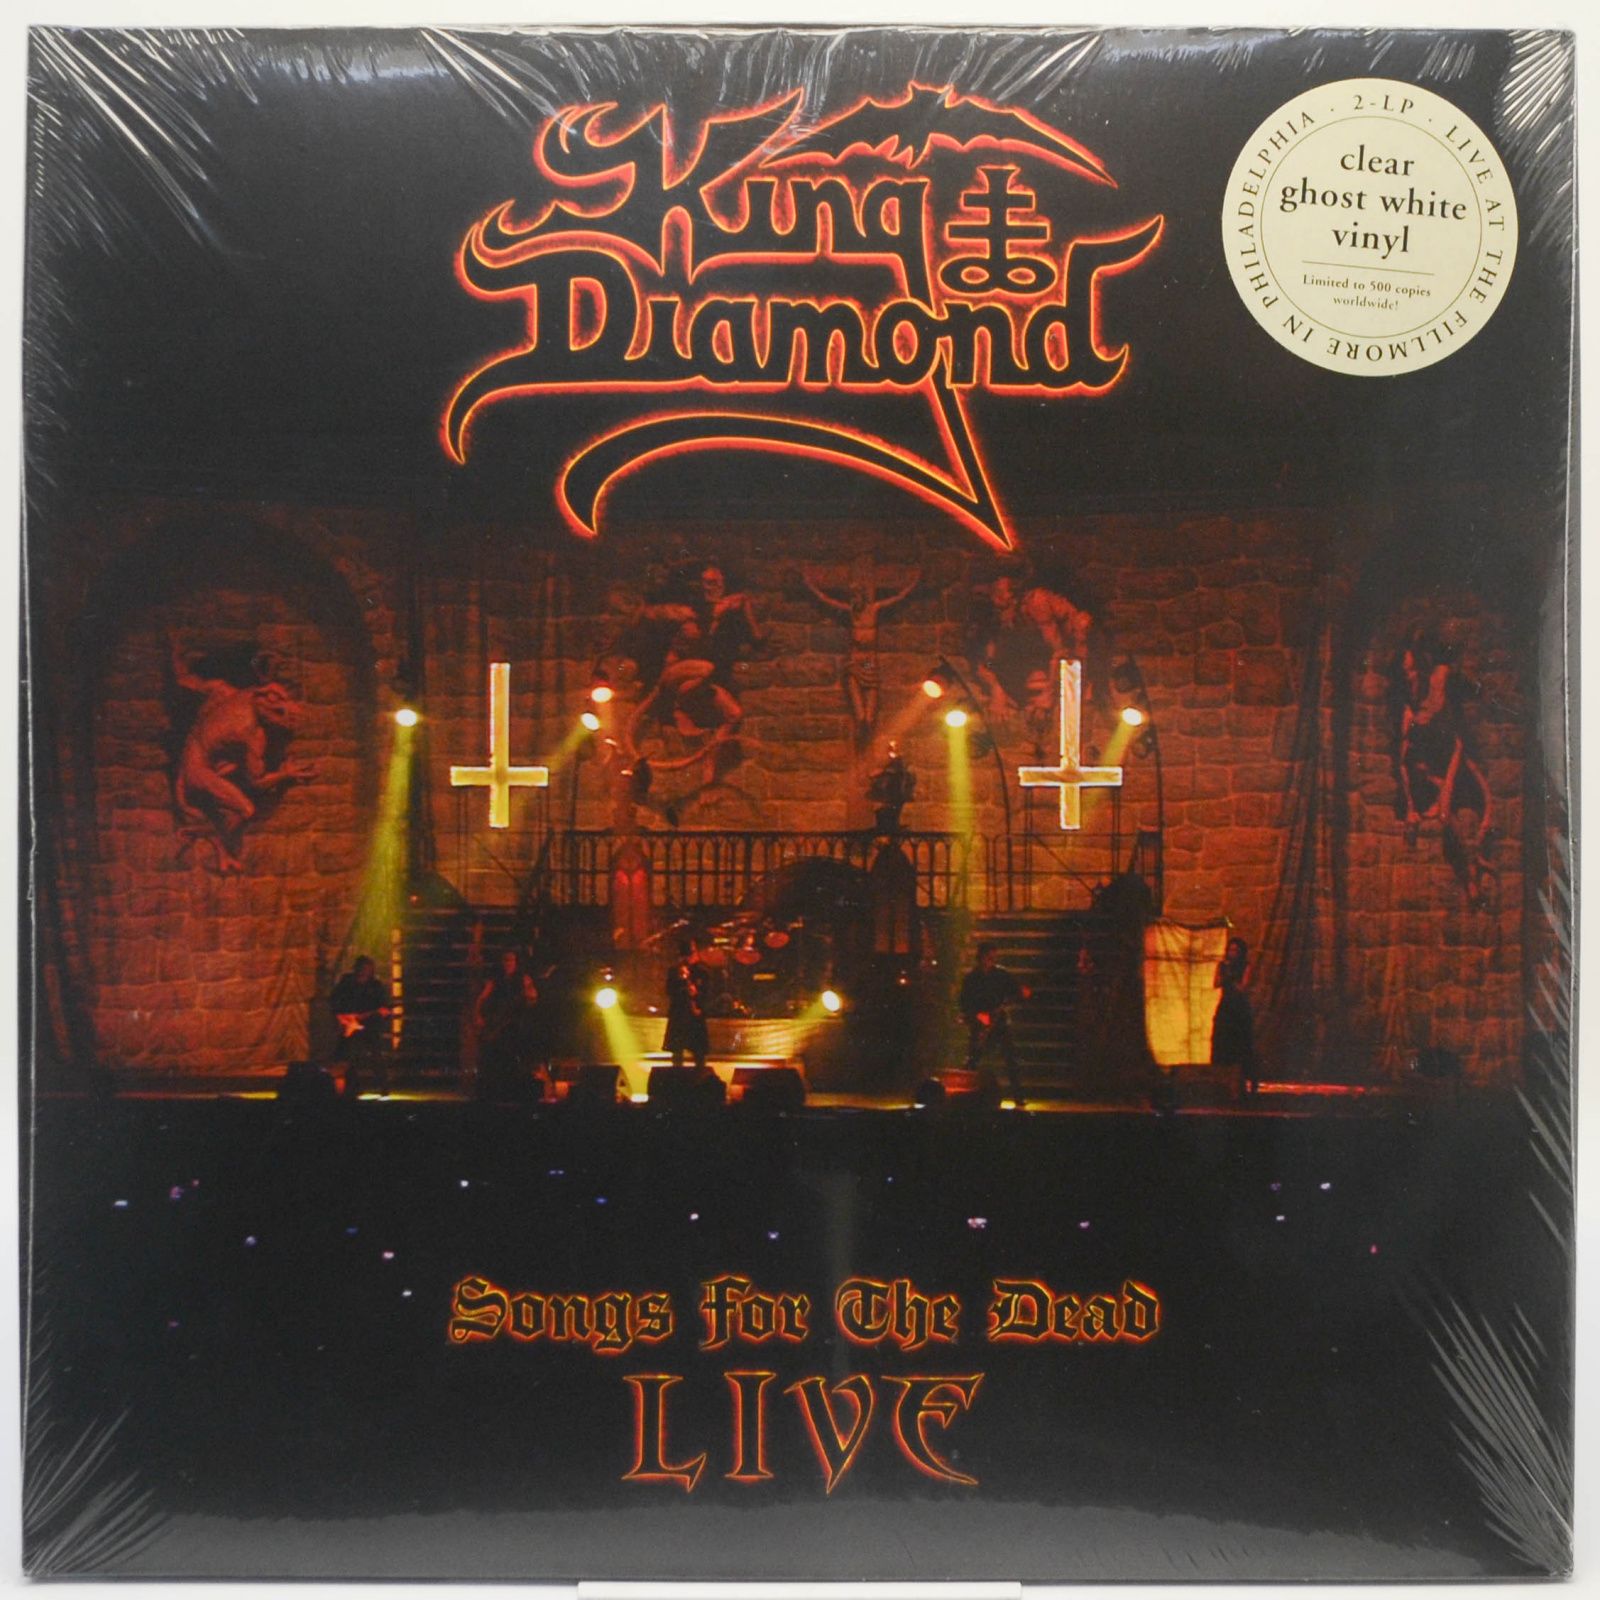 King Diamond — Songs For The Dead Live (2LP), 2019